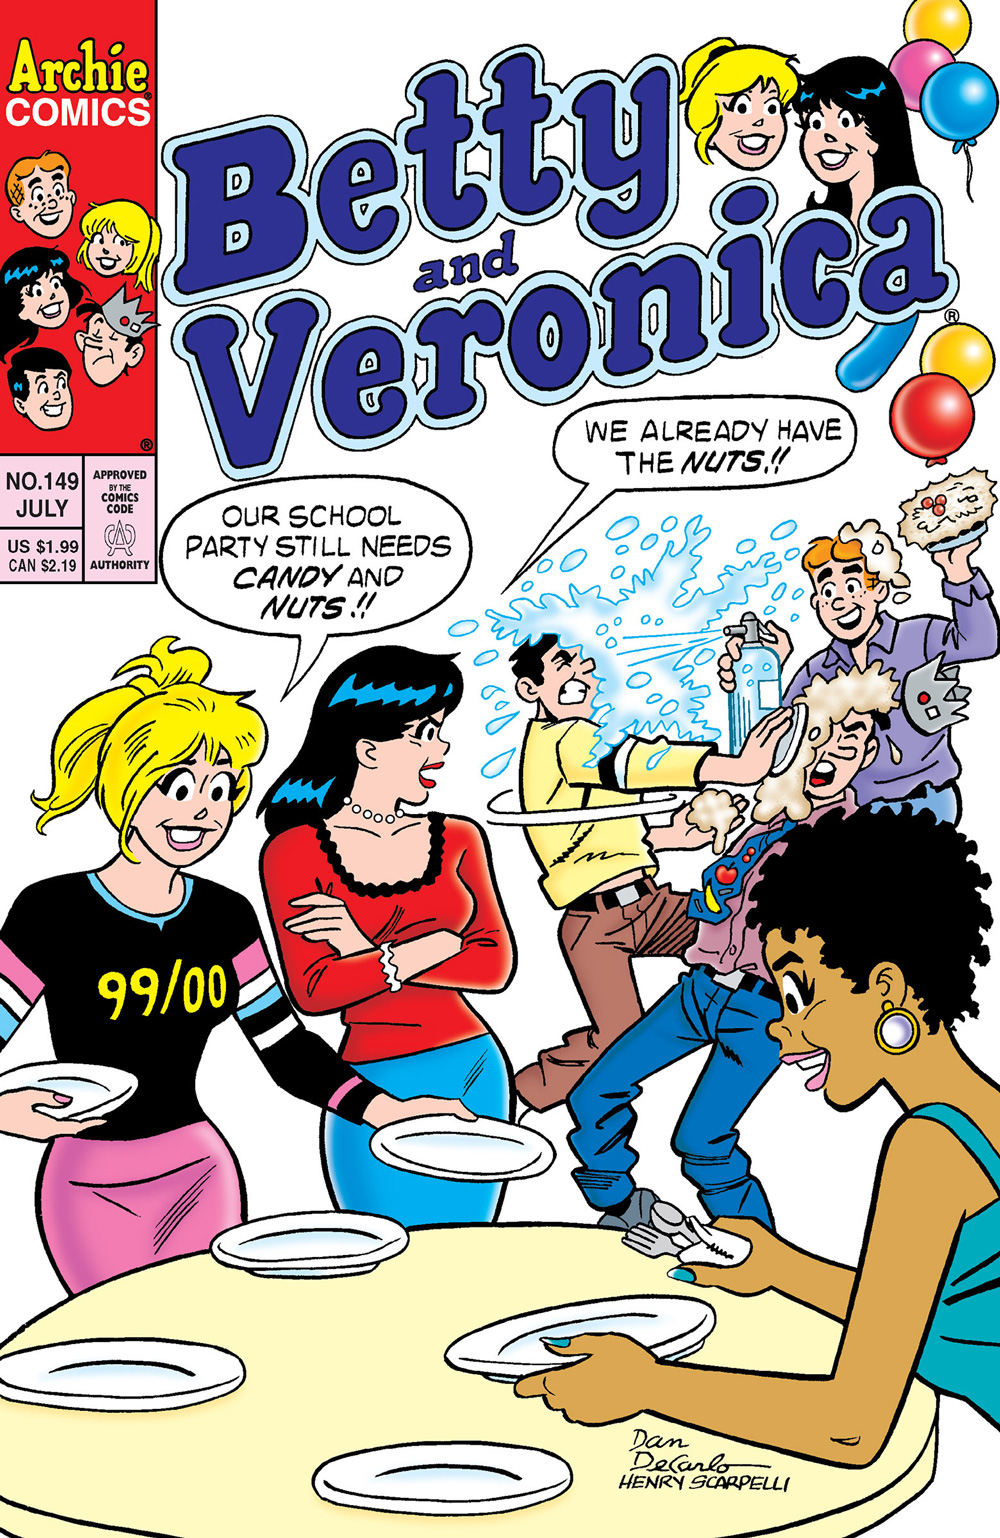 Betty, Veronica, and Nancy set up a dining table for a party, while Reggie, Archie, and Jughead have a food fight behind them with pies and bottles of seltzer. Betty says their party still needs candy and nuts, and Veronica, looking at the boys, says they already have the nuts. 